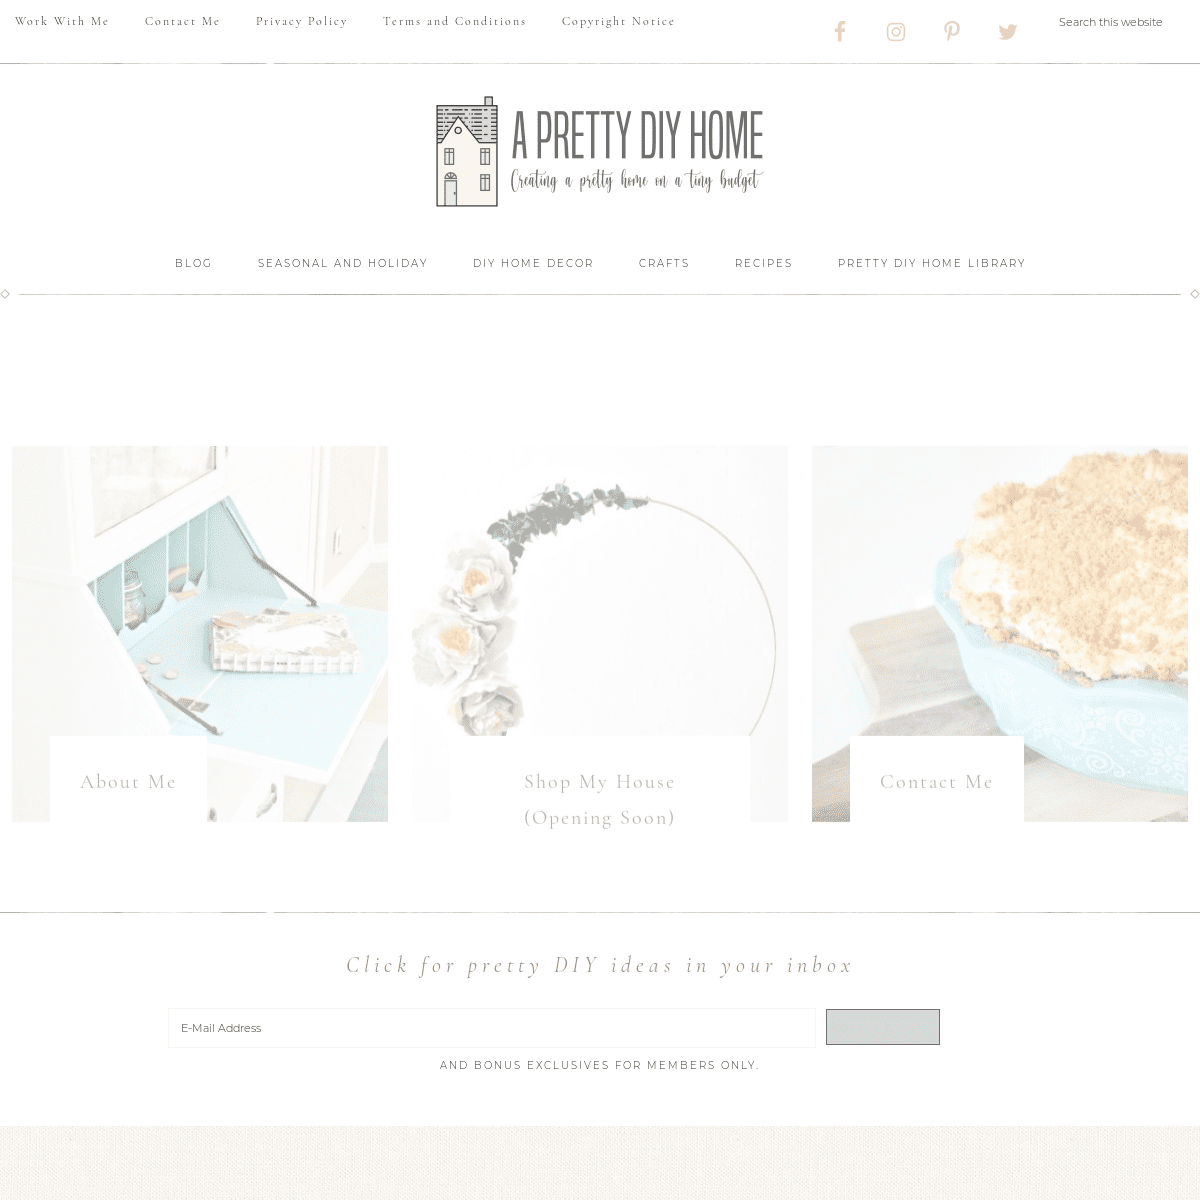 A complete backup of https://prettydiyhome.com